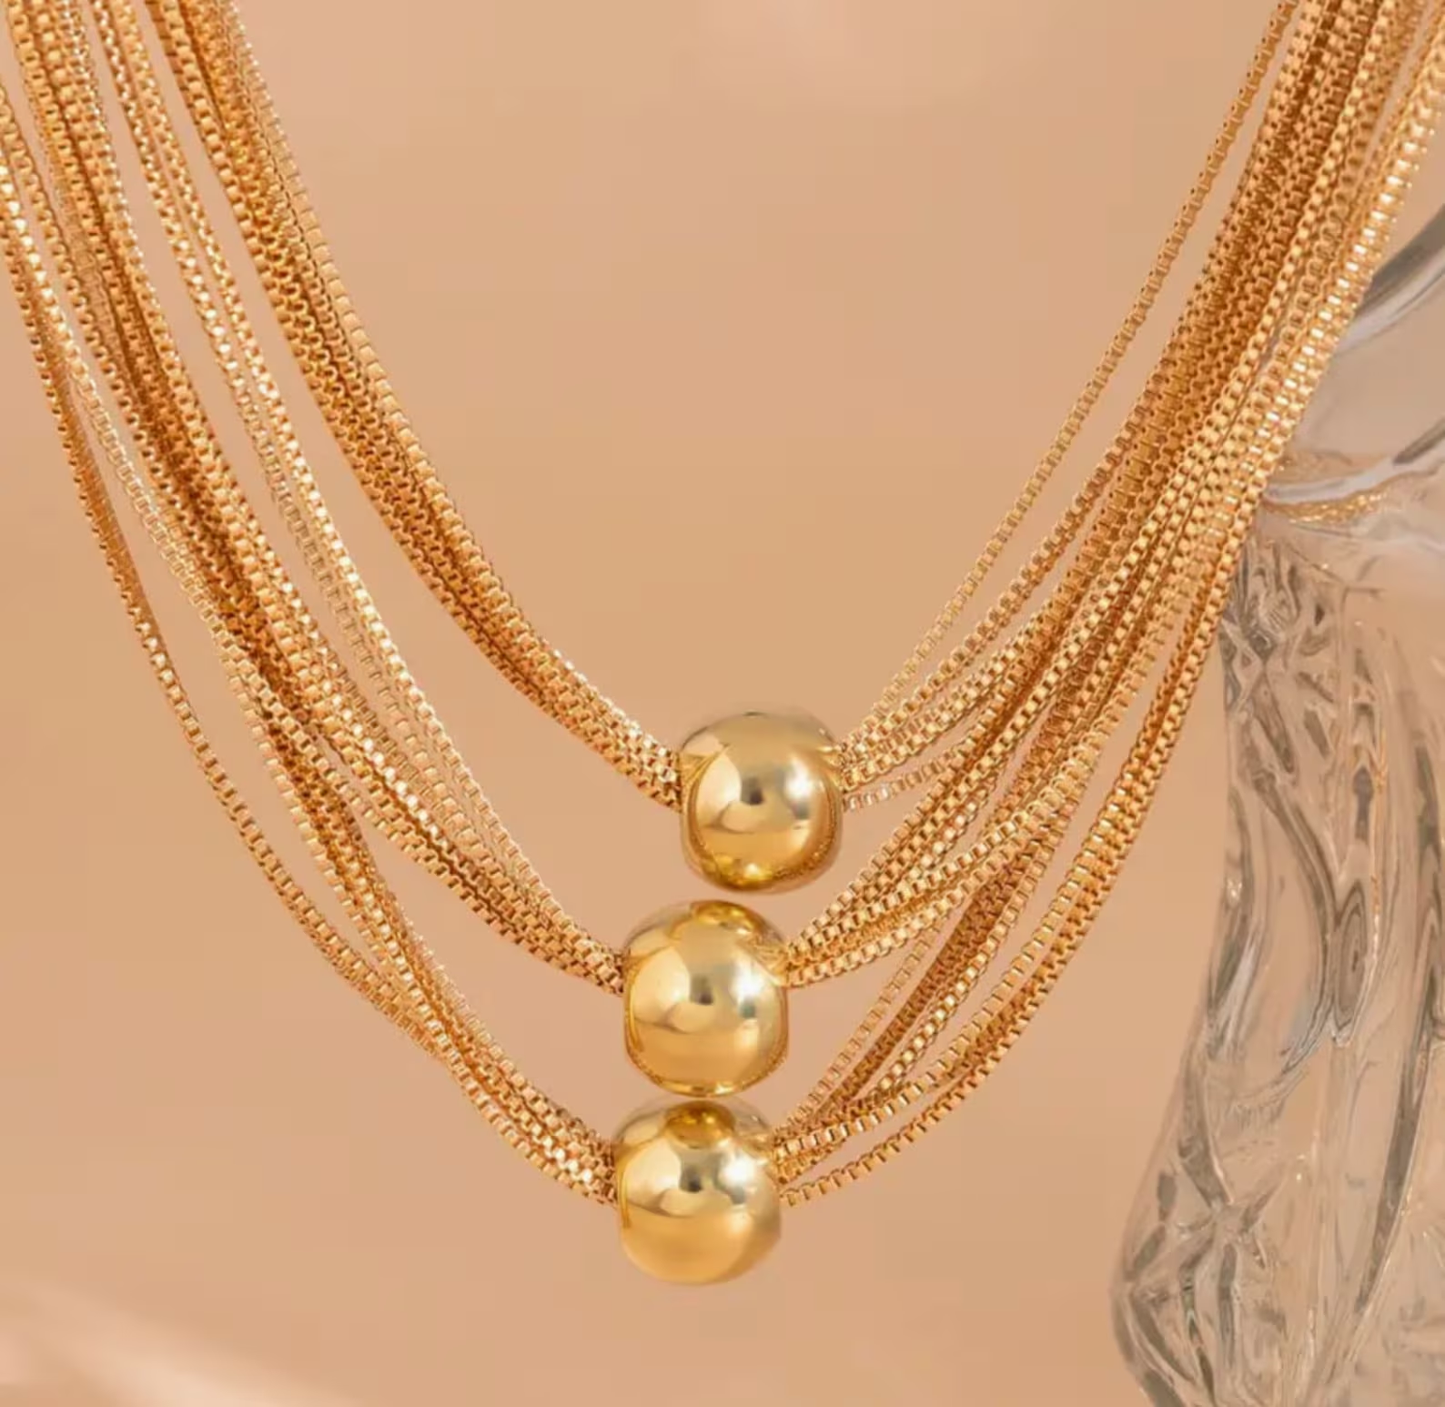 Elegant 3 Layer Gold Chain Necklace